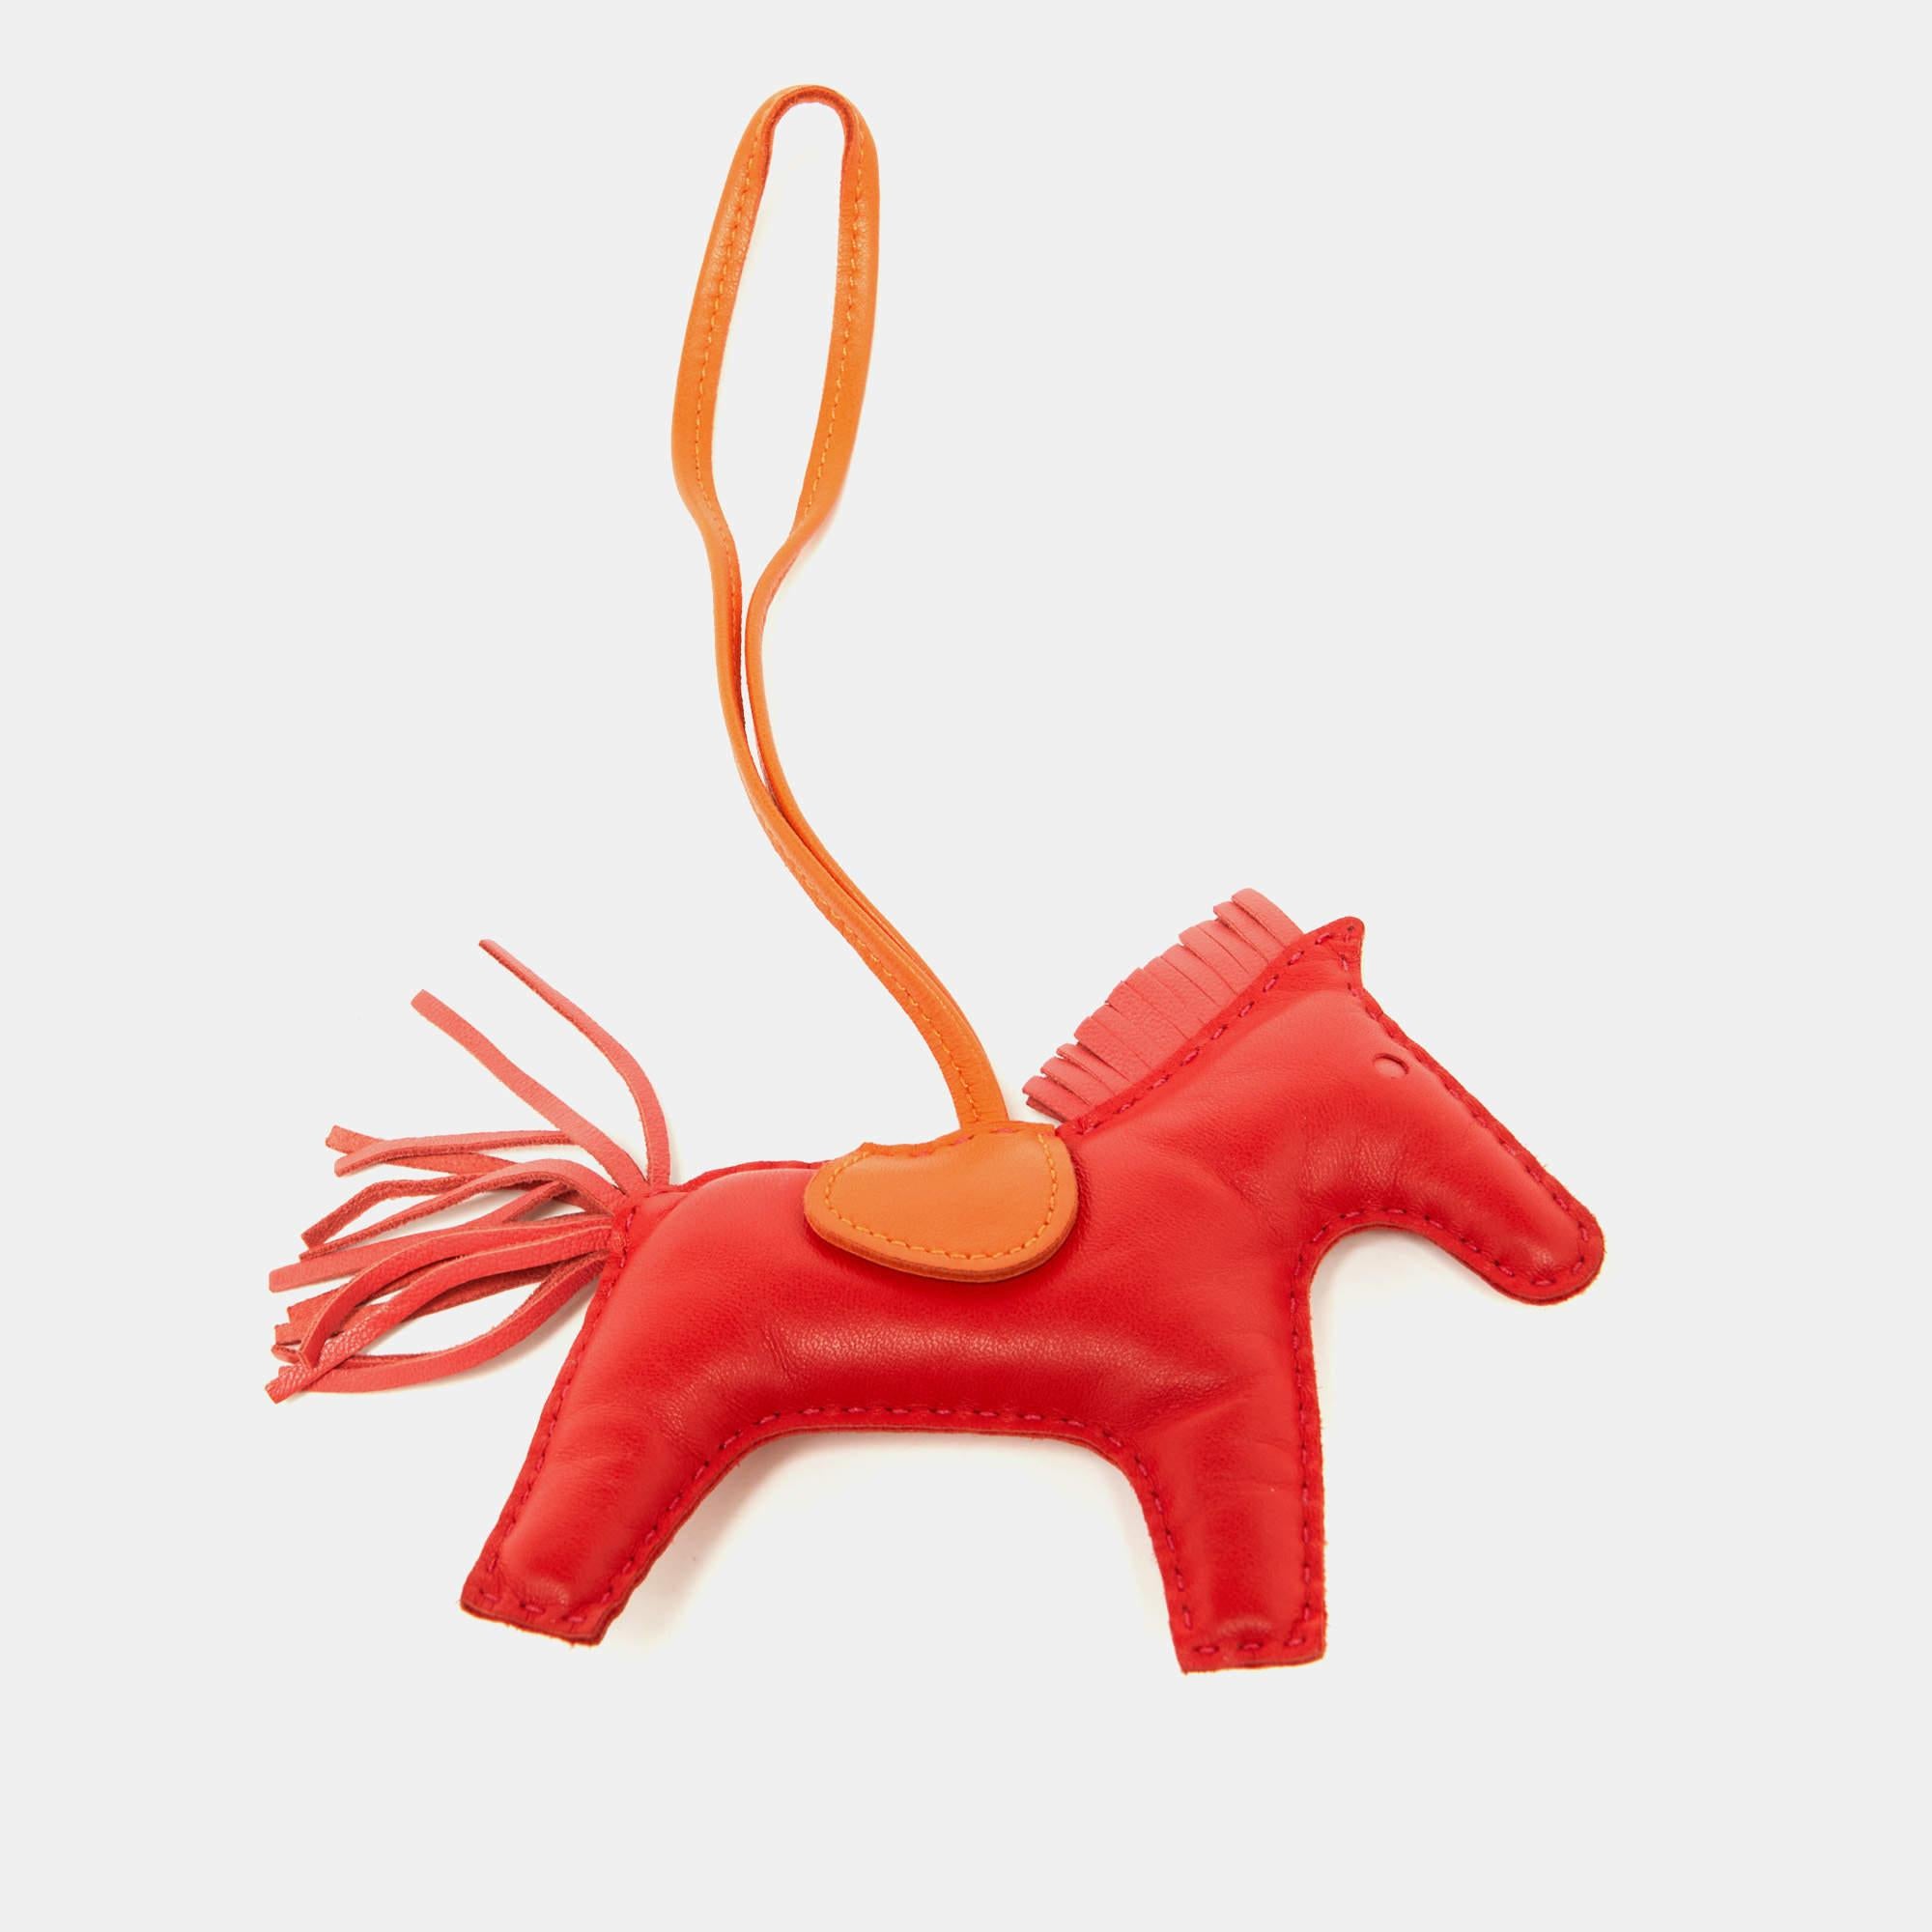 The Hermes Rodeo charm is a vibrant and stylish accessory. Made from high-quality leather, it features a rodeo-inspired design with fringed accents in striking red and orange hues. Perfect for adding a playful touch to any handbag or